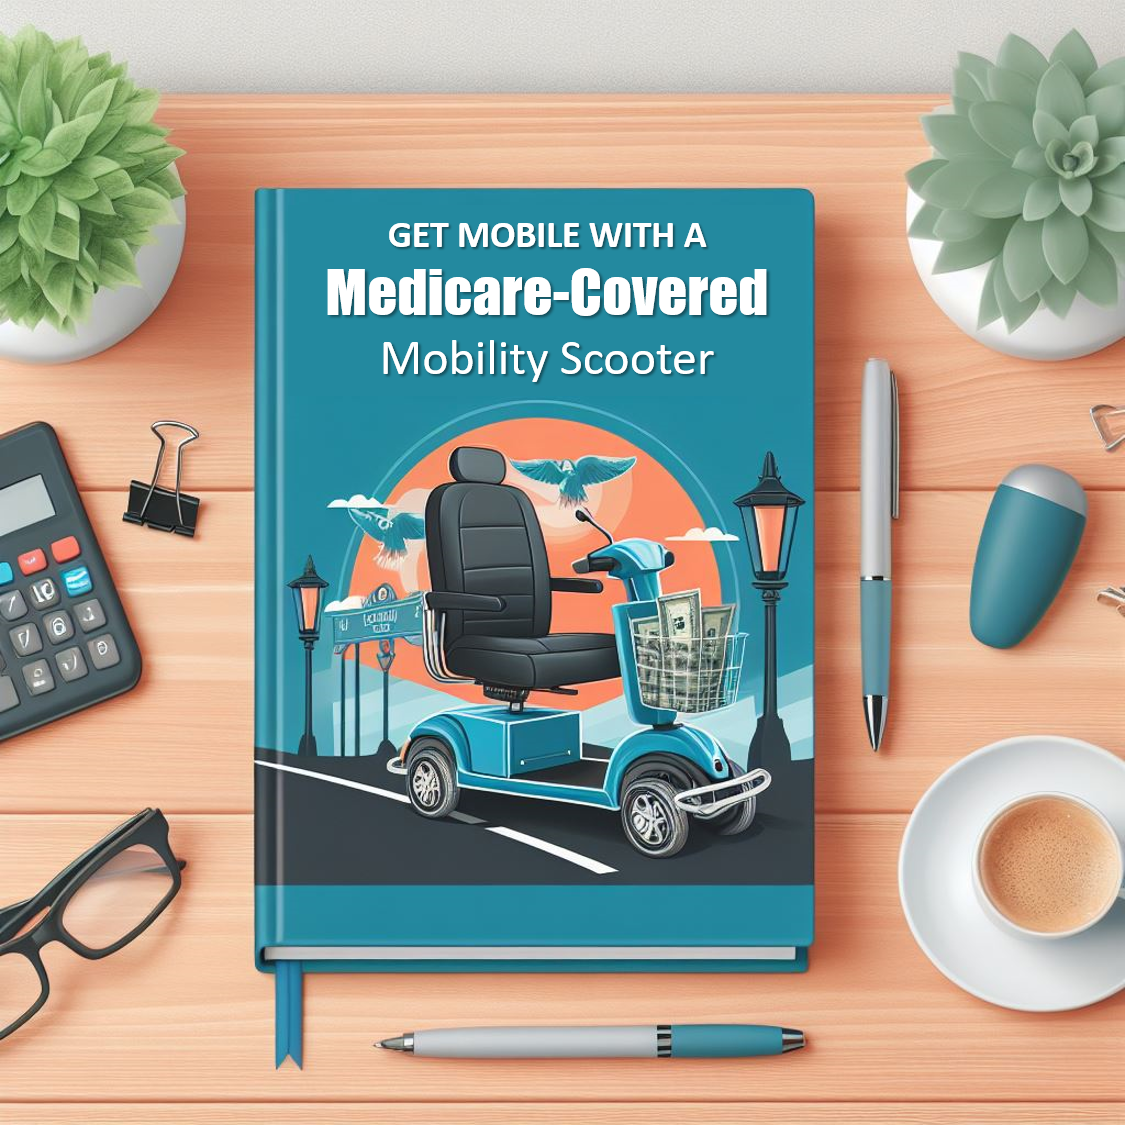 Get Mobile with a Medicare-Covered Mobility Scooter